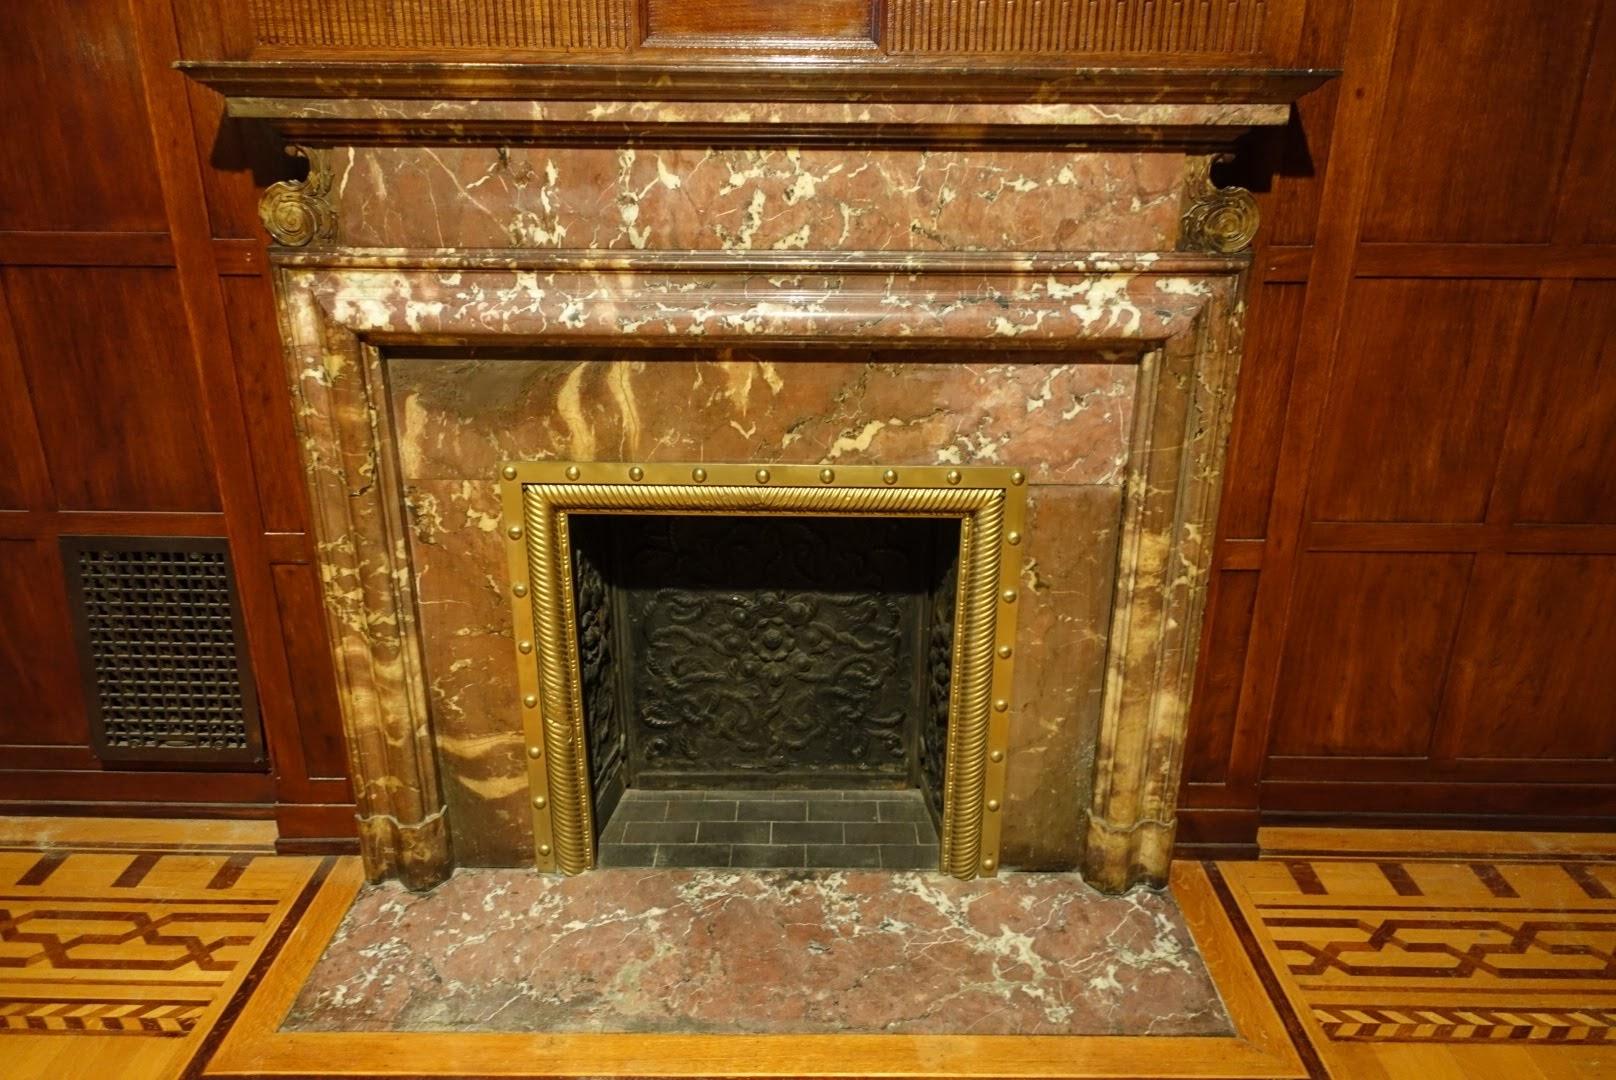 This Circa 1900 Royale bolection mantel features brown and dark red marble with cream colored veins. Included is the original brass firebox surround. This was original to an upper West side Manhattan estate on West 85th St in NYC. Hearth not